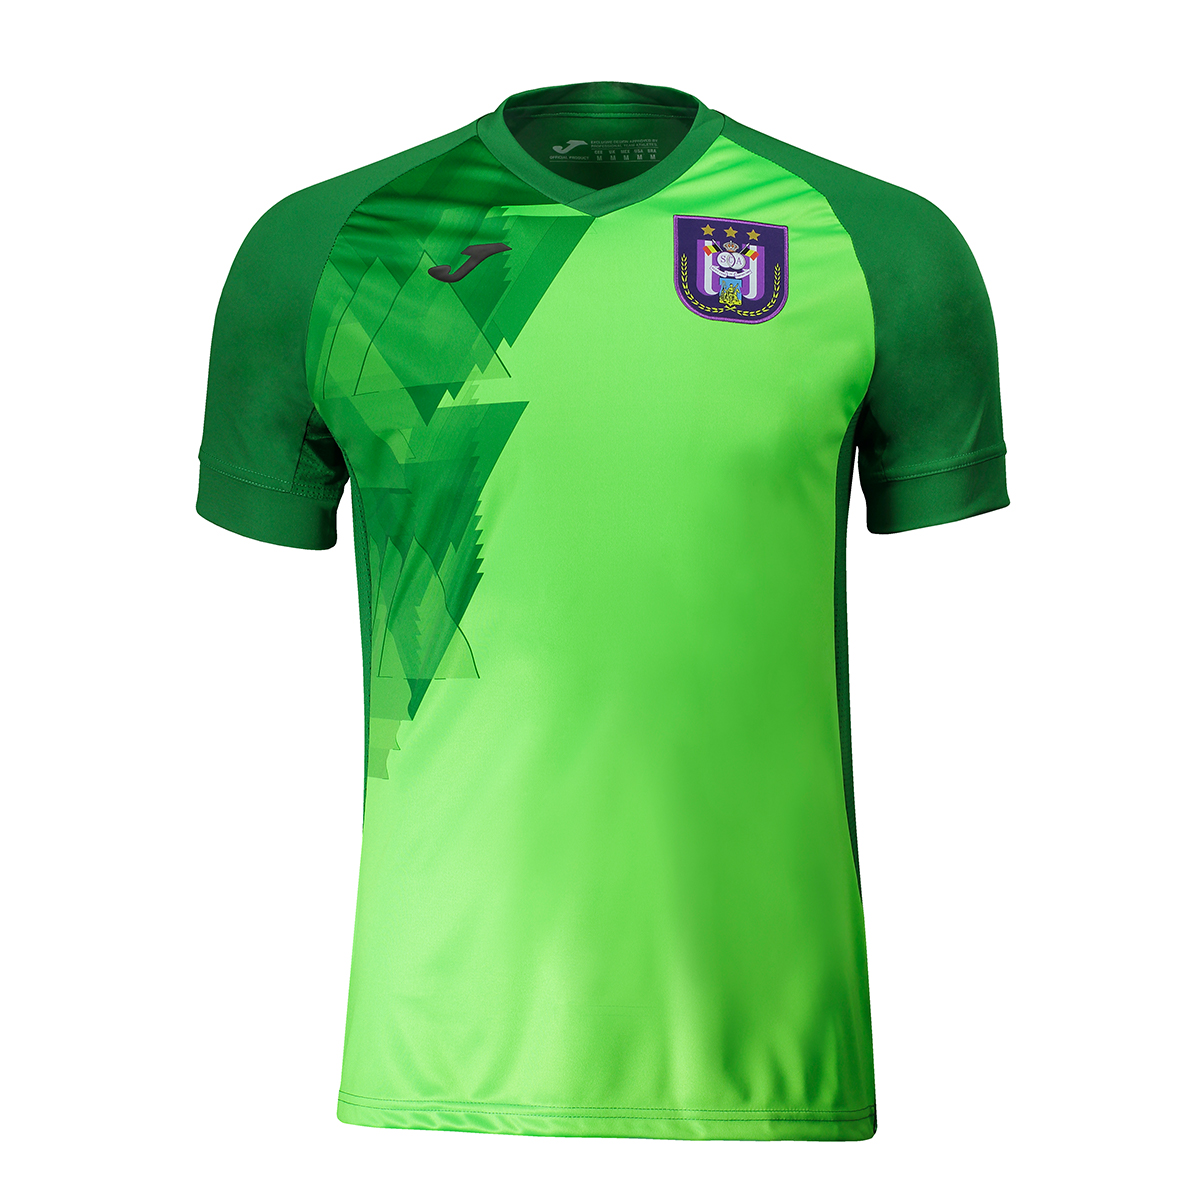 RSCA Training Jersey 2020/2021 - Green is-hover